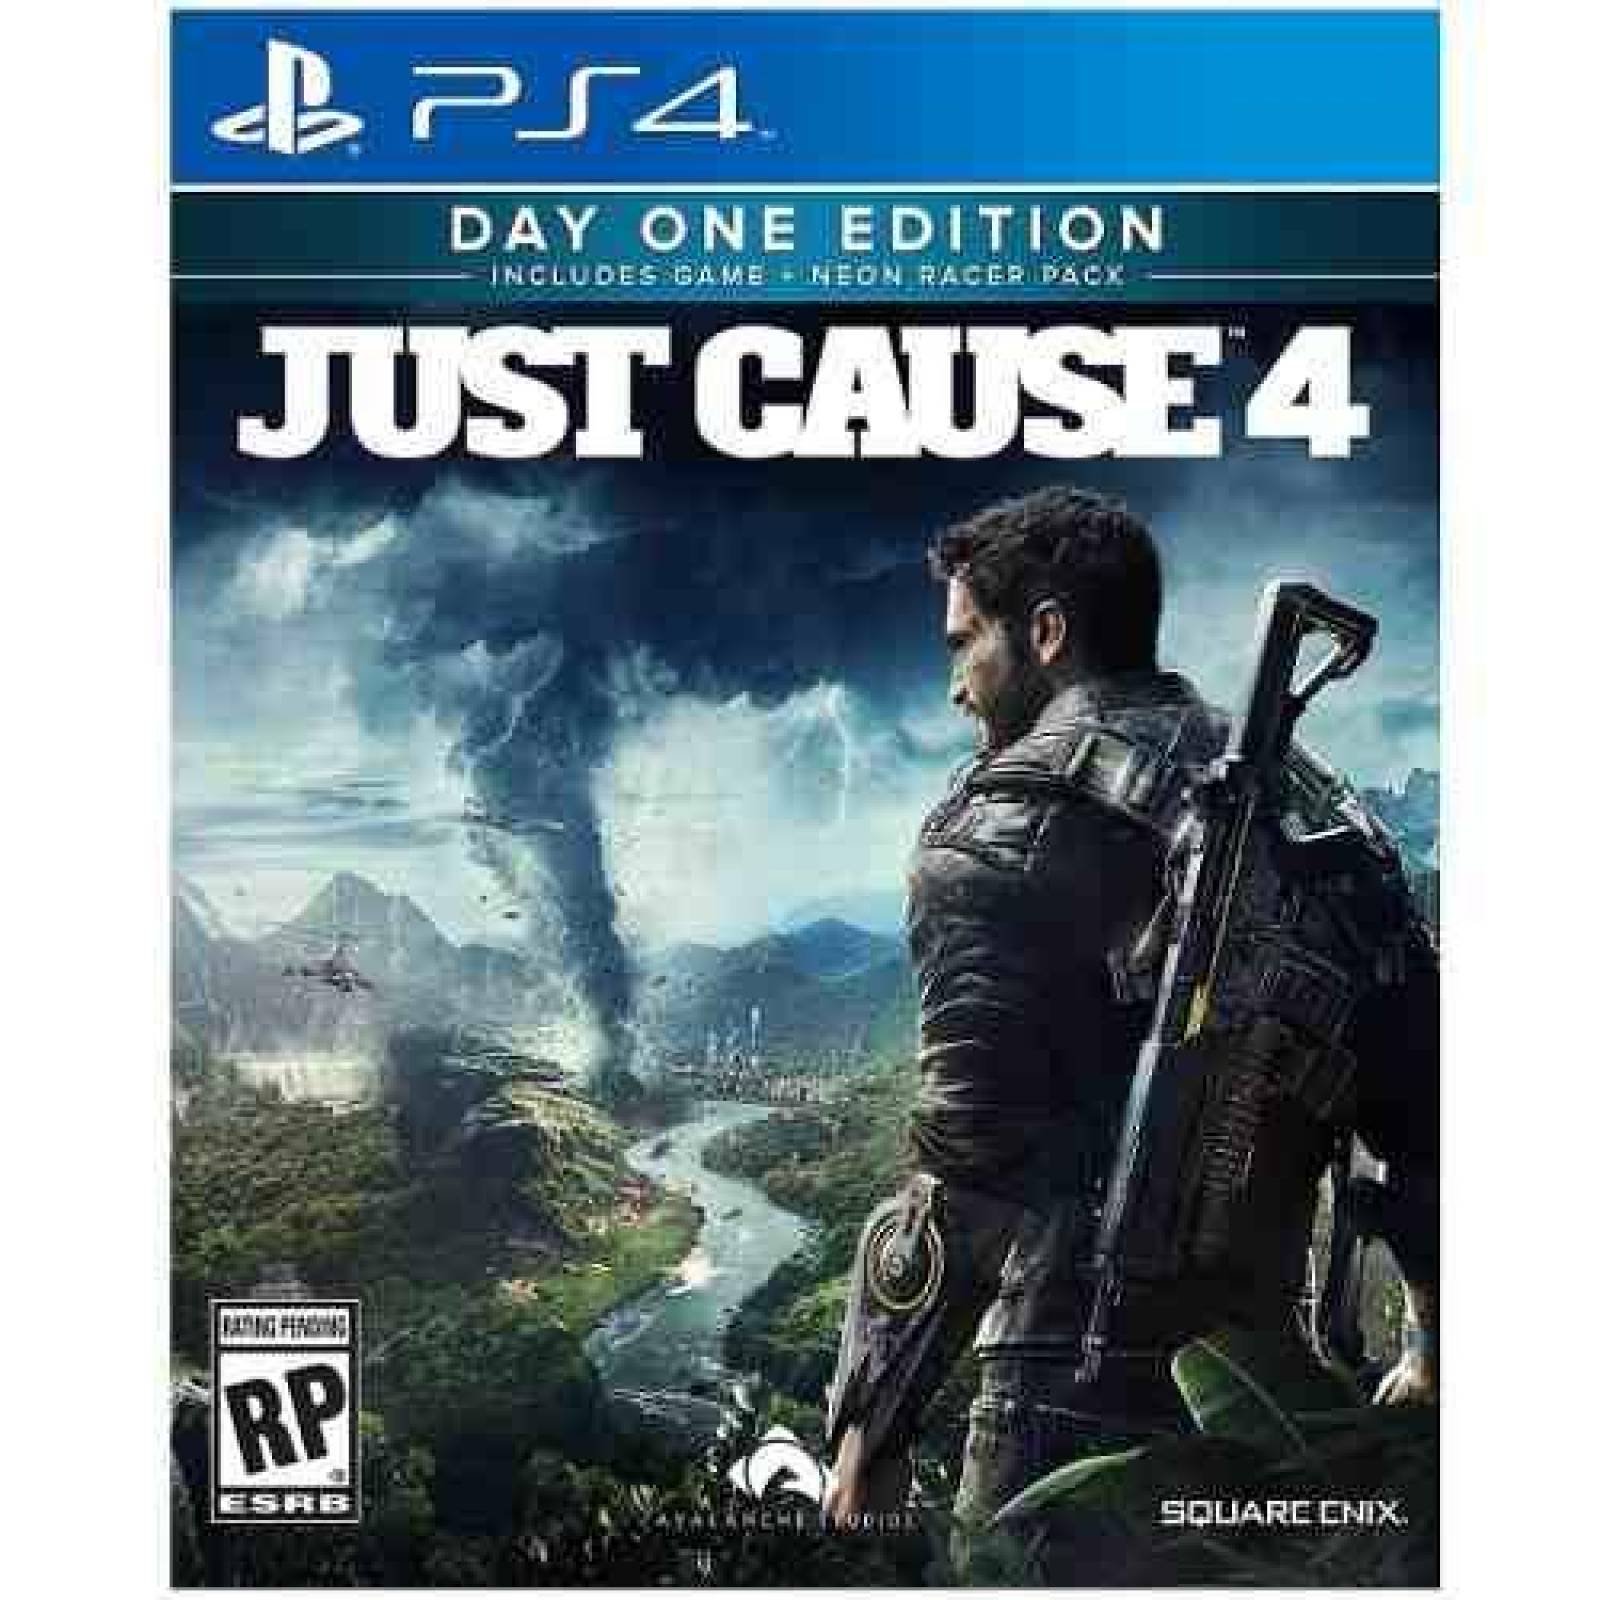 Just Cause 4 Day One Limited Edition Ps4 - S001 